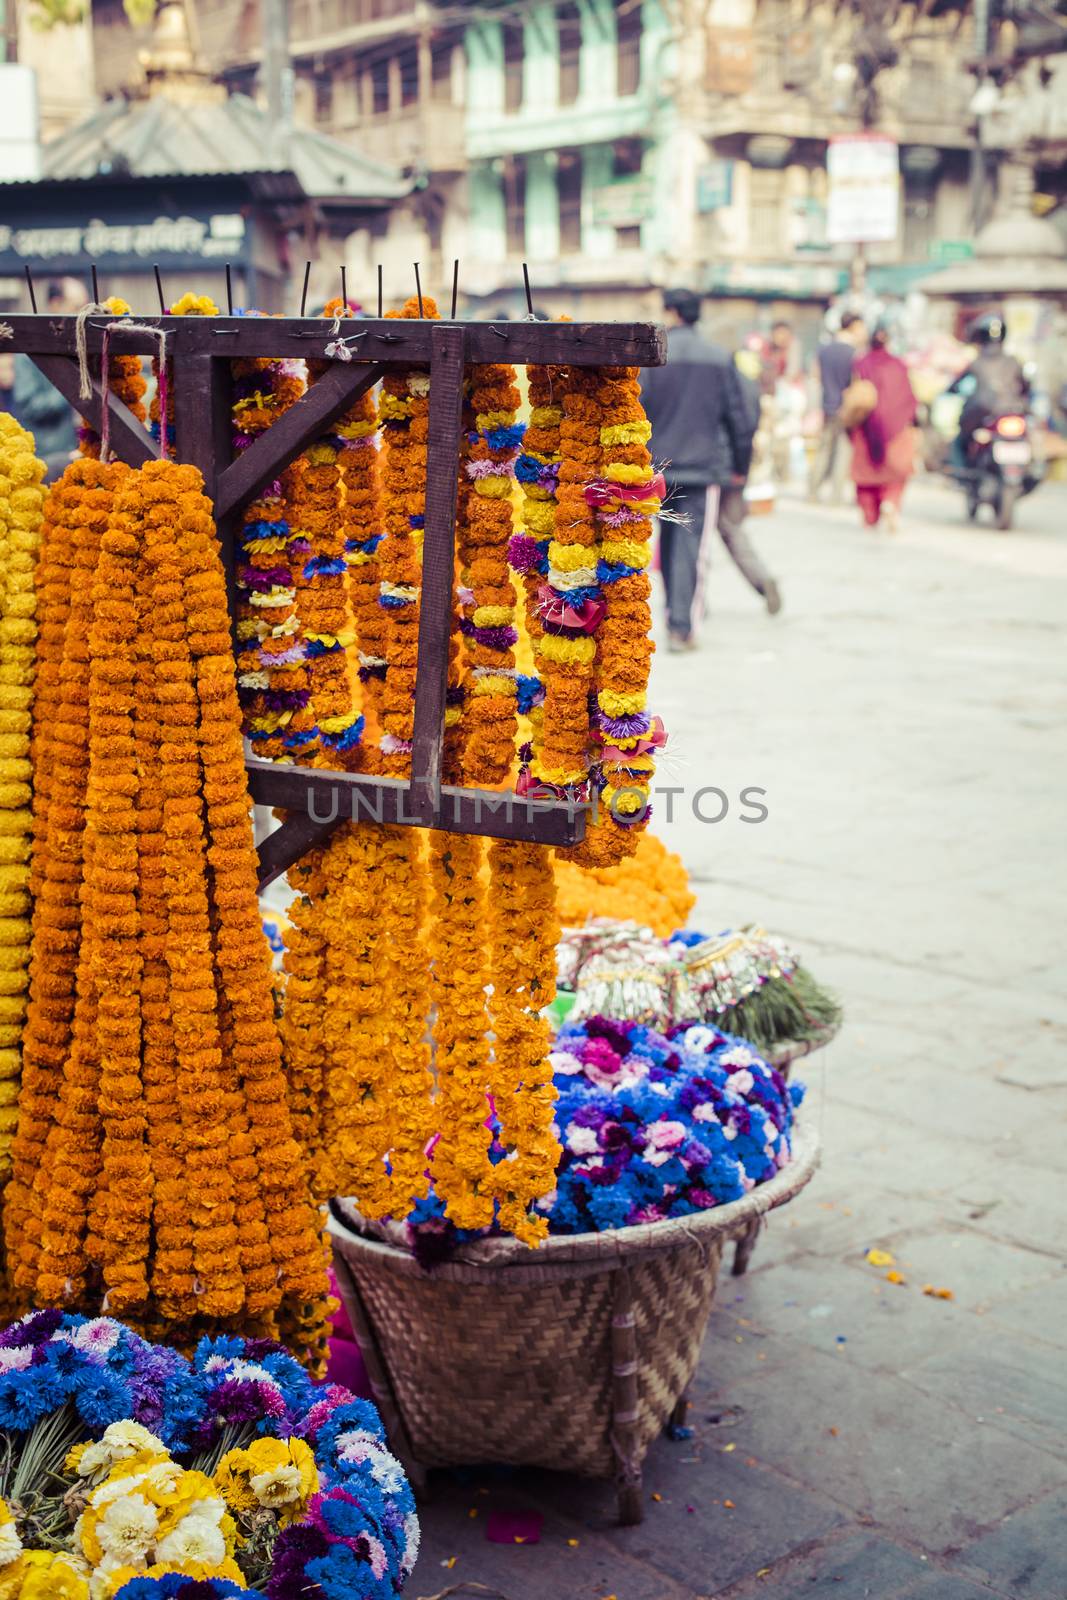 The street vendor sels his fruits and vegetables in Thamel in Ka by mariusz_prusaczyk